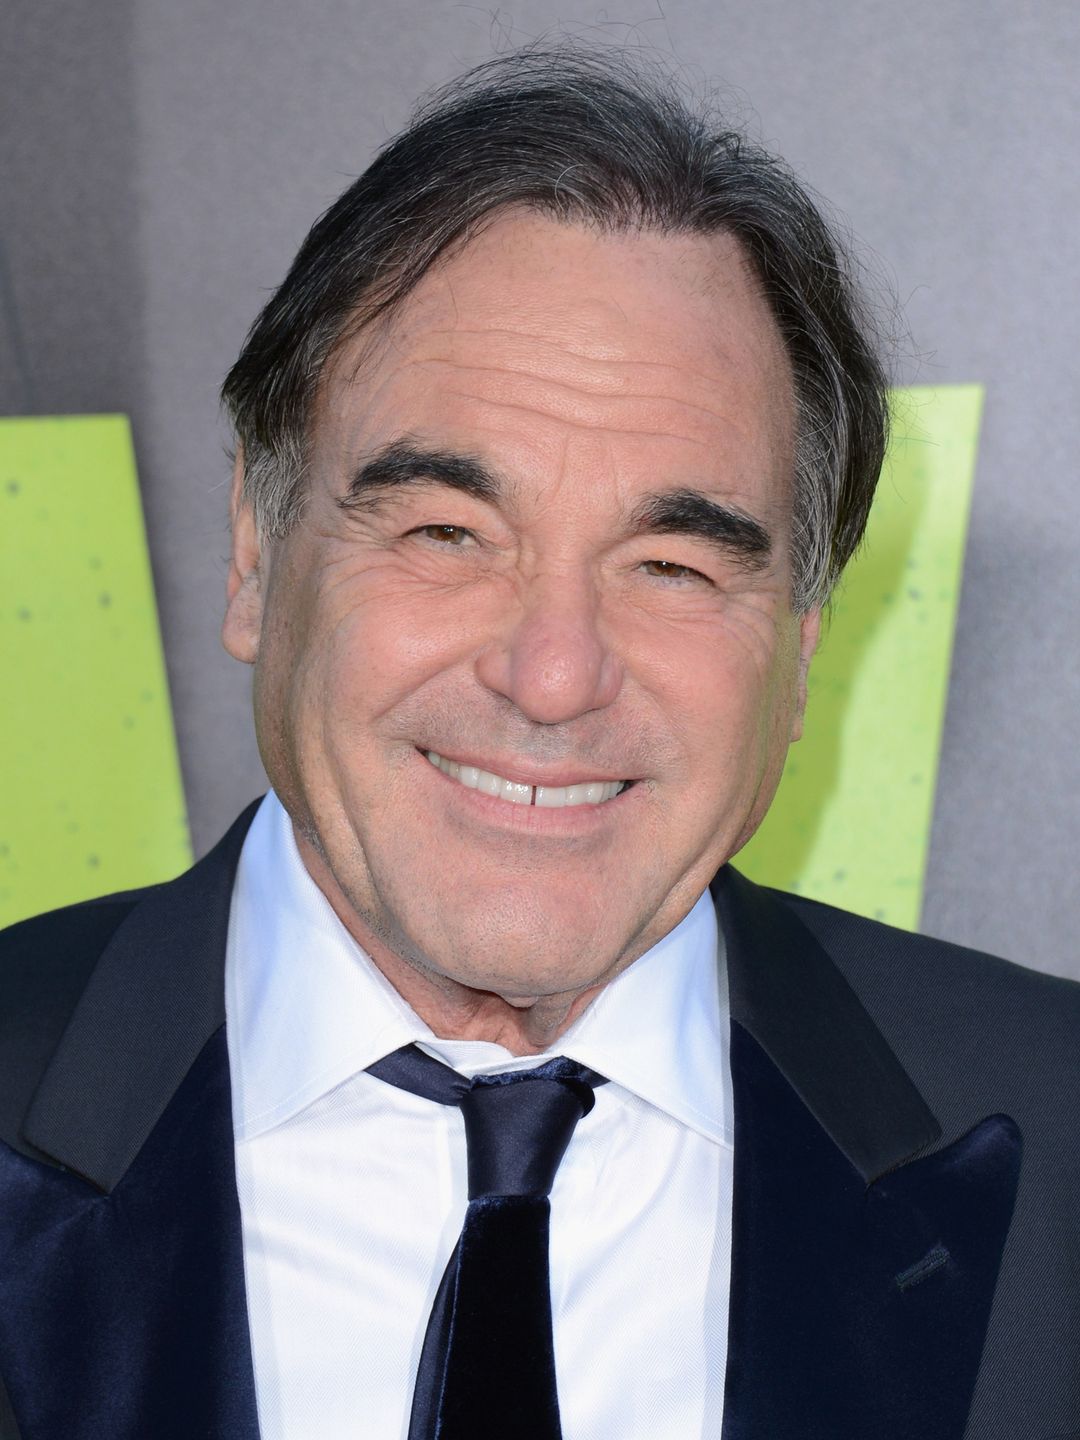 Oliver Stone who is his father